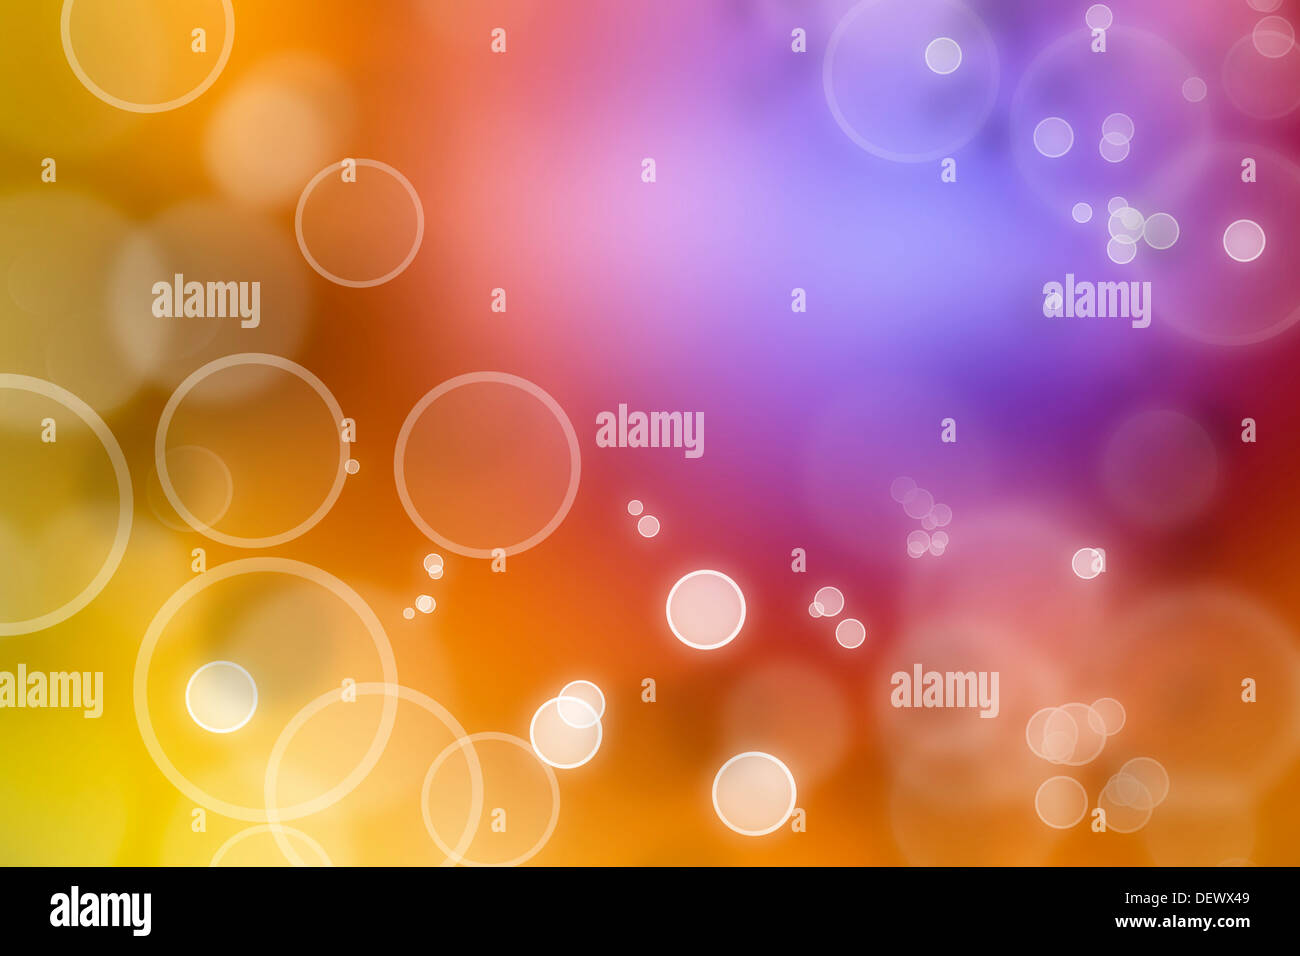 Abstract orange and blue tone background Stock Photo